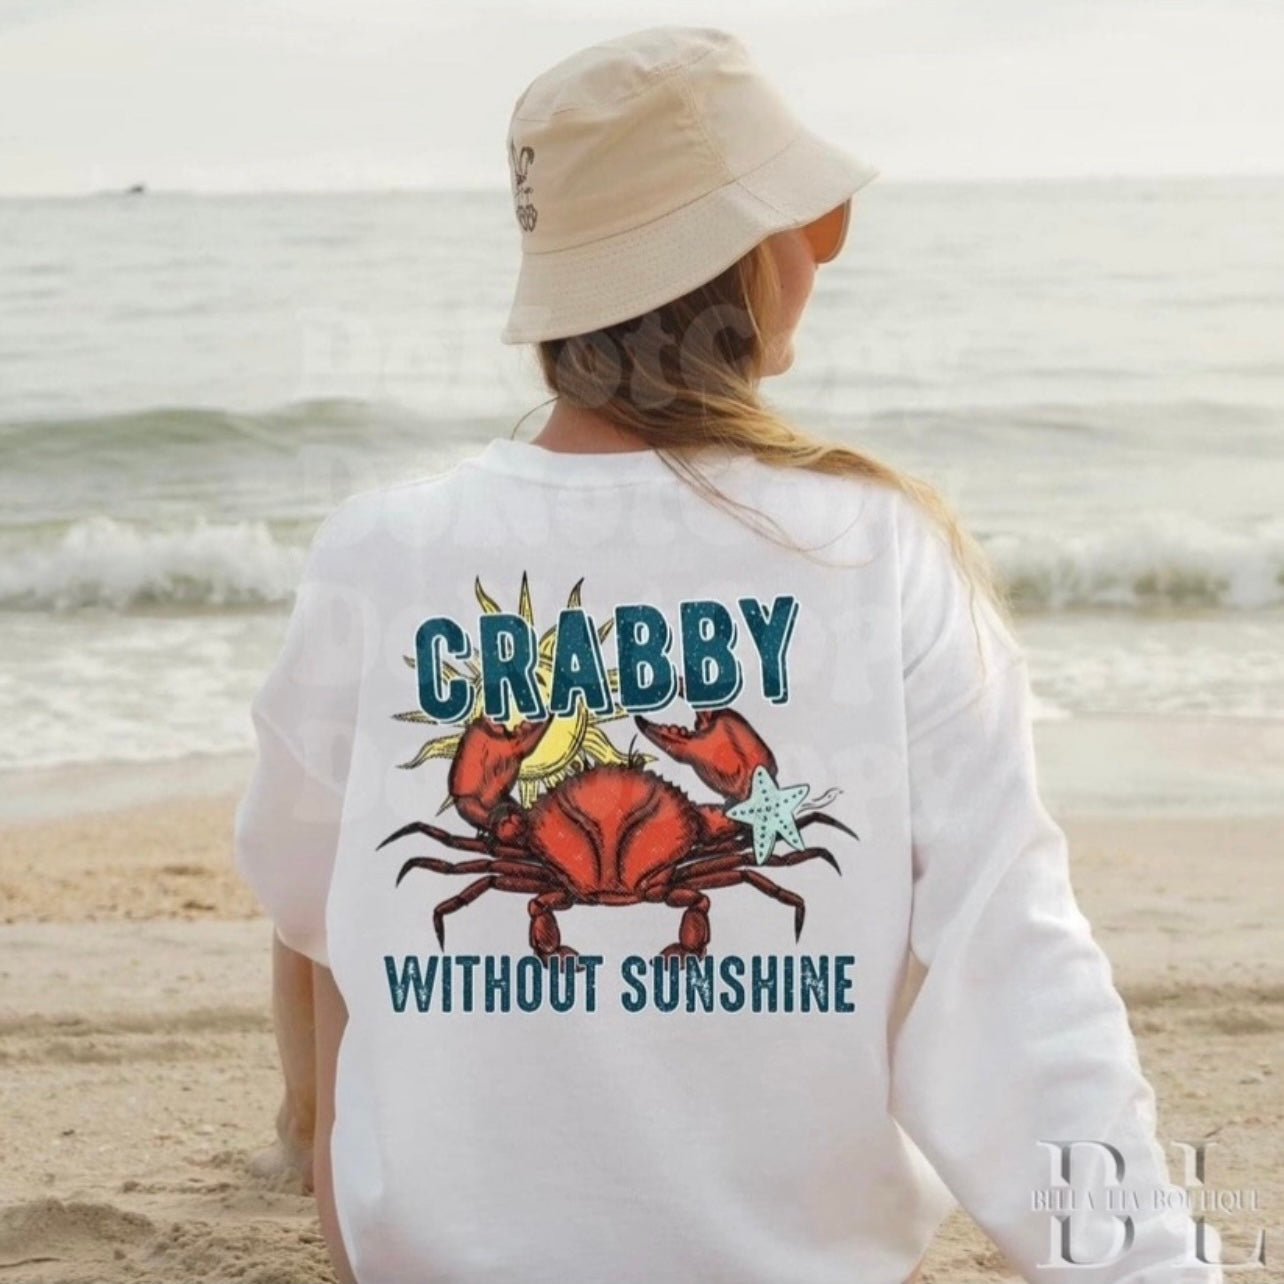 Crabby without Sunshine Graphic Tee or Sweatshirt - Bella Lia Boutique